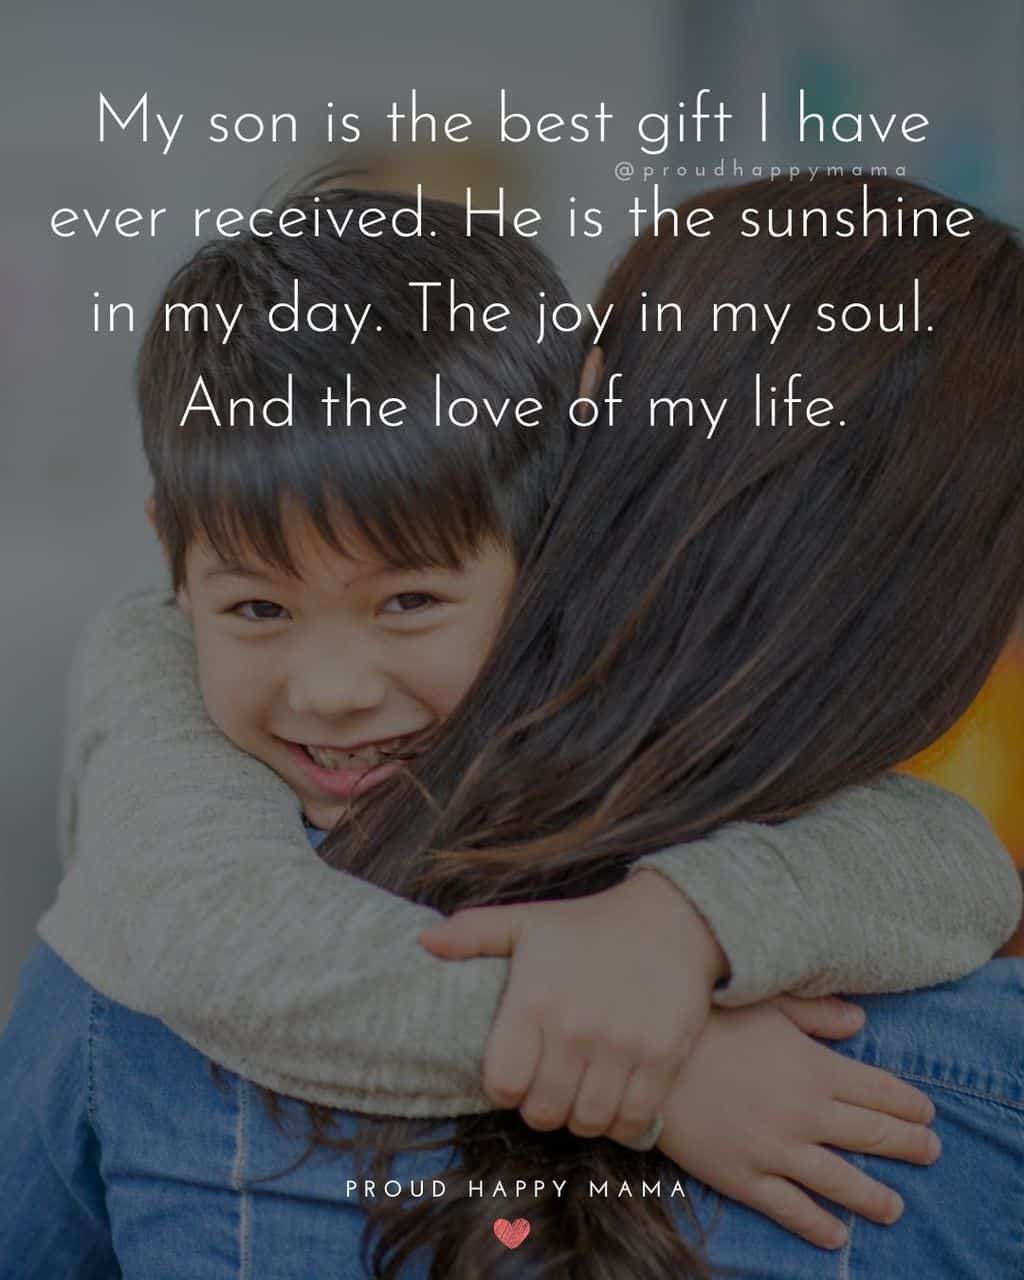 Son Quotes - My son is the best gift I have ever received. He is the sunshine in my day. The joy in my soul. And the love of my life.